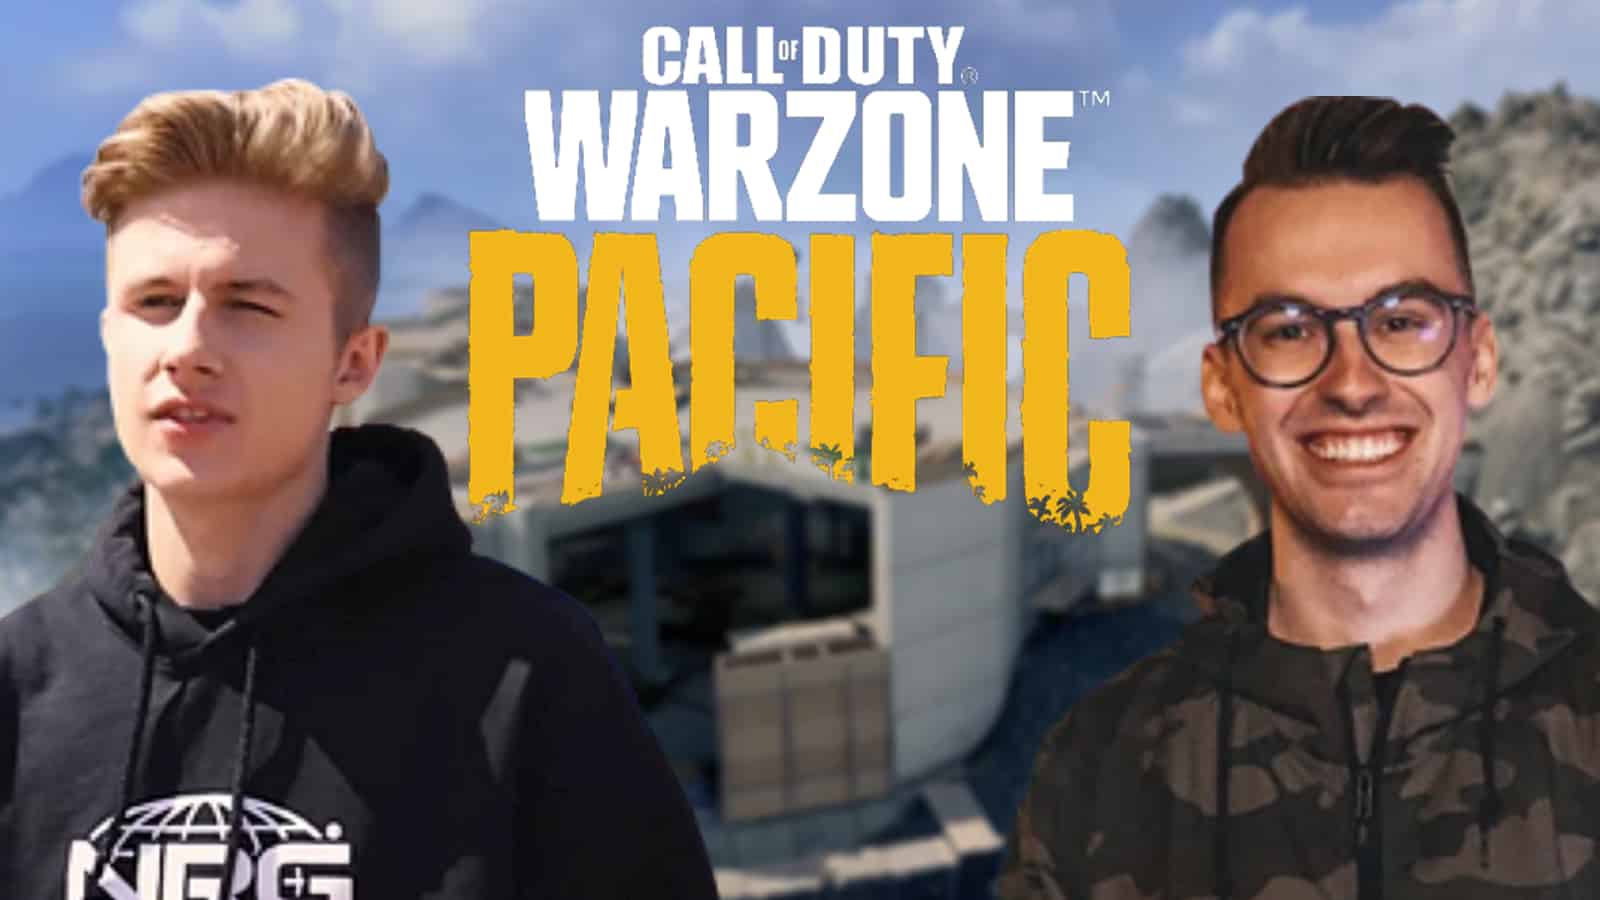 JoeWo and Symfuhny on a Warzone Pacific graphic